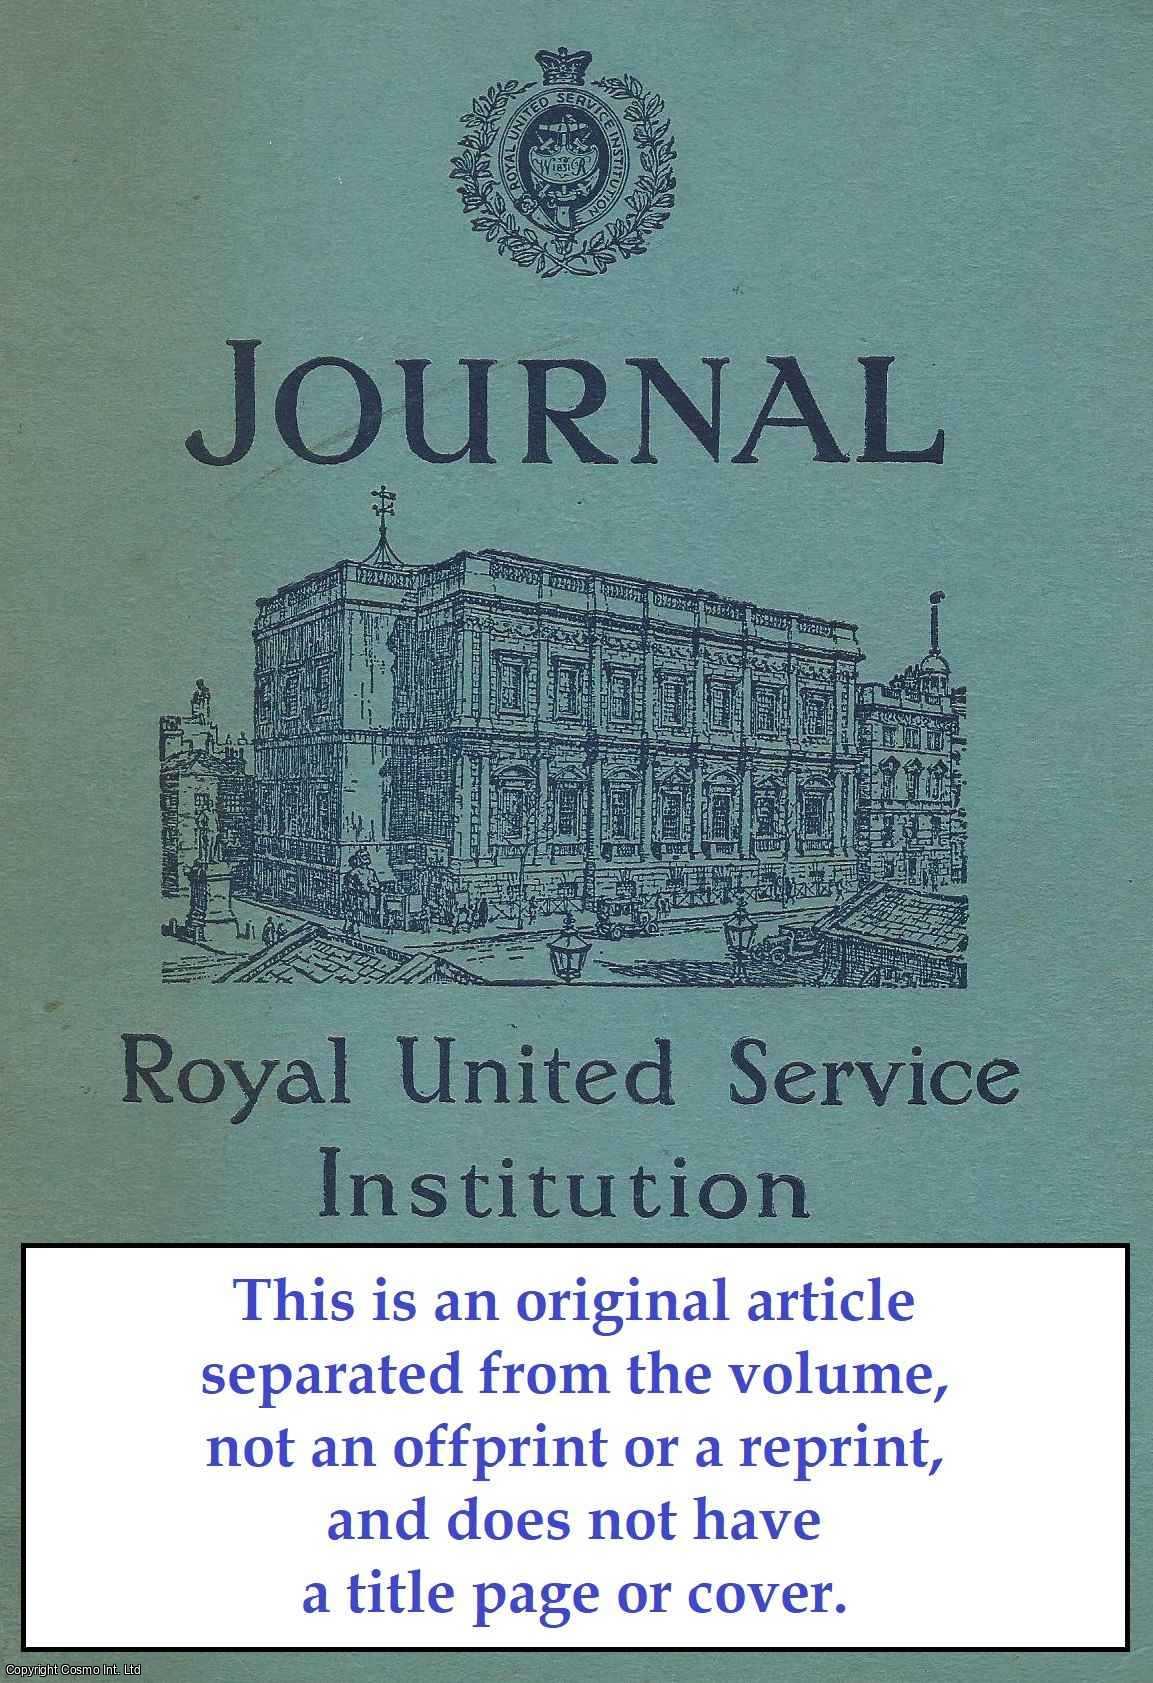 S. W. Roskill - The U-Boat Campaign of 1917 and Third Ypres. An original article from Journal of The Royal United Service Institution, 1959.